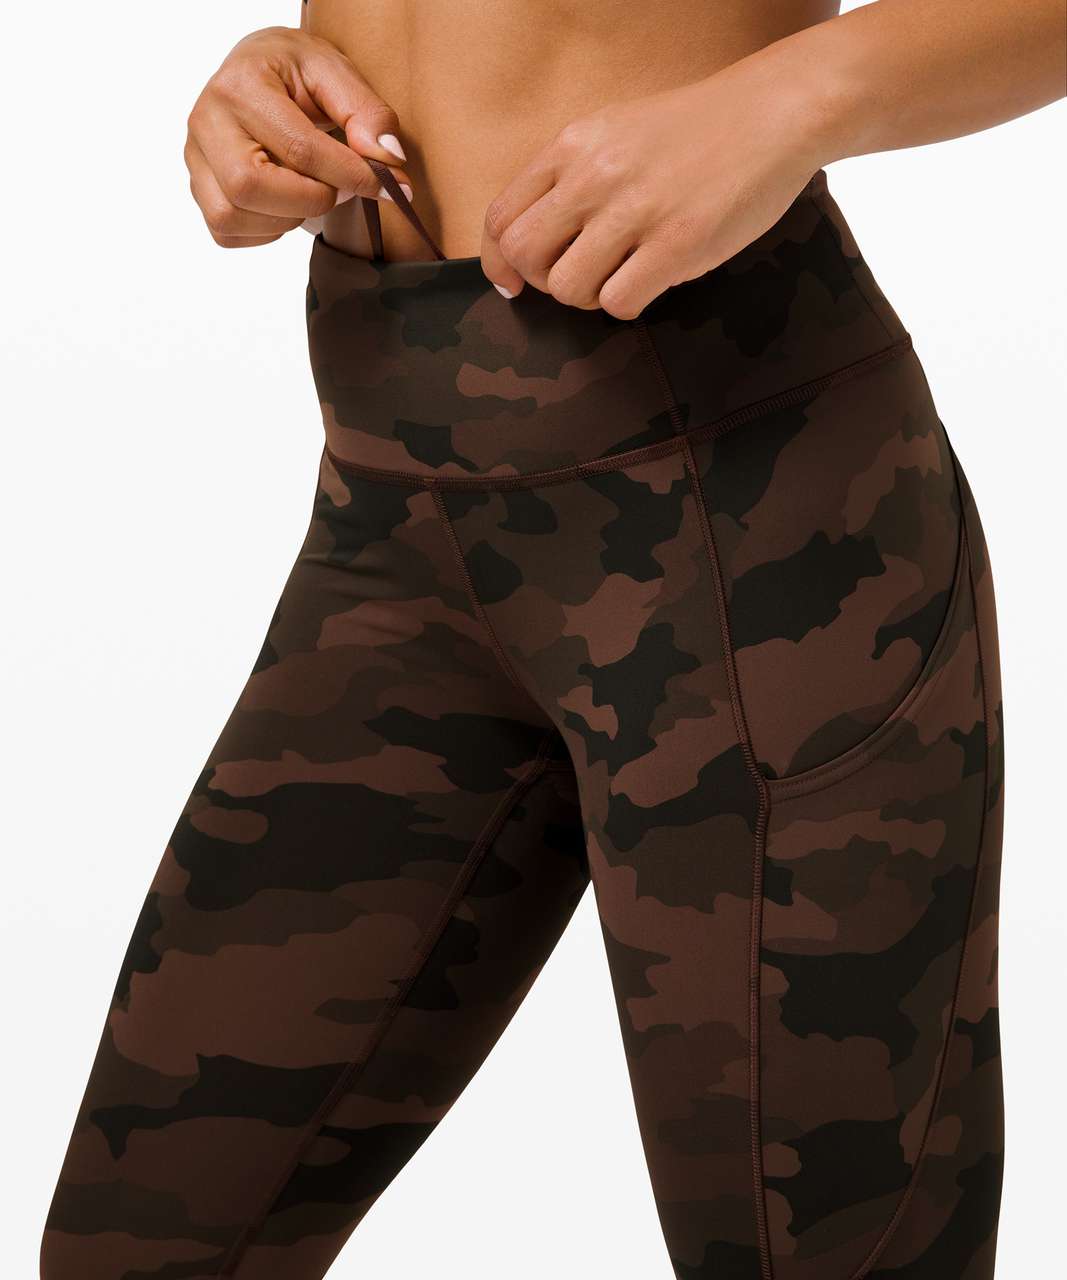 Lululemon Fast and Free Tight II 25" *Non-Reflective Nulux - Heritage 365 Camo Brown Earth Multi